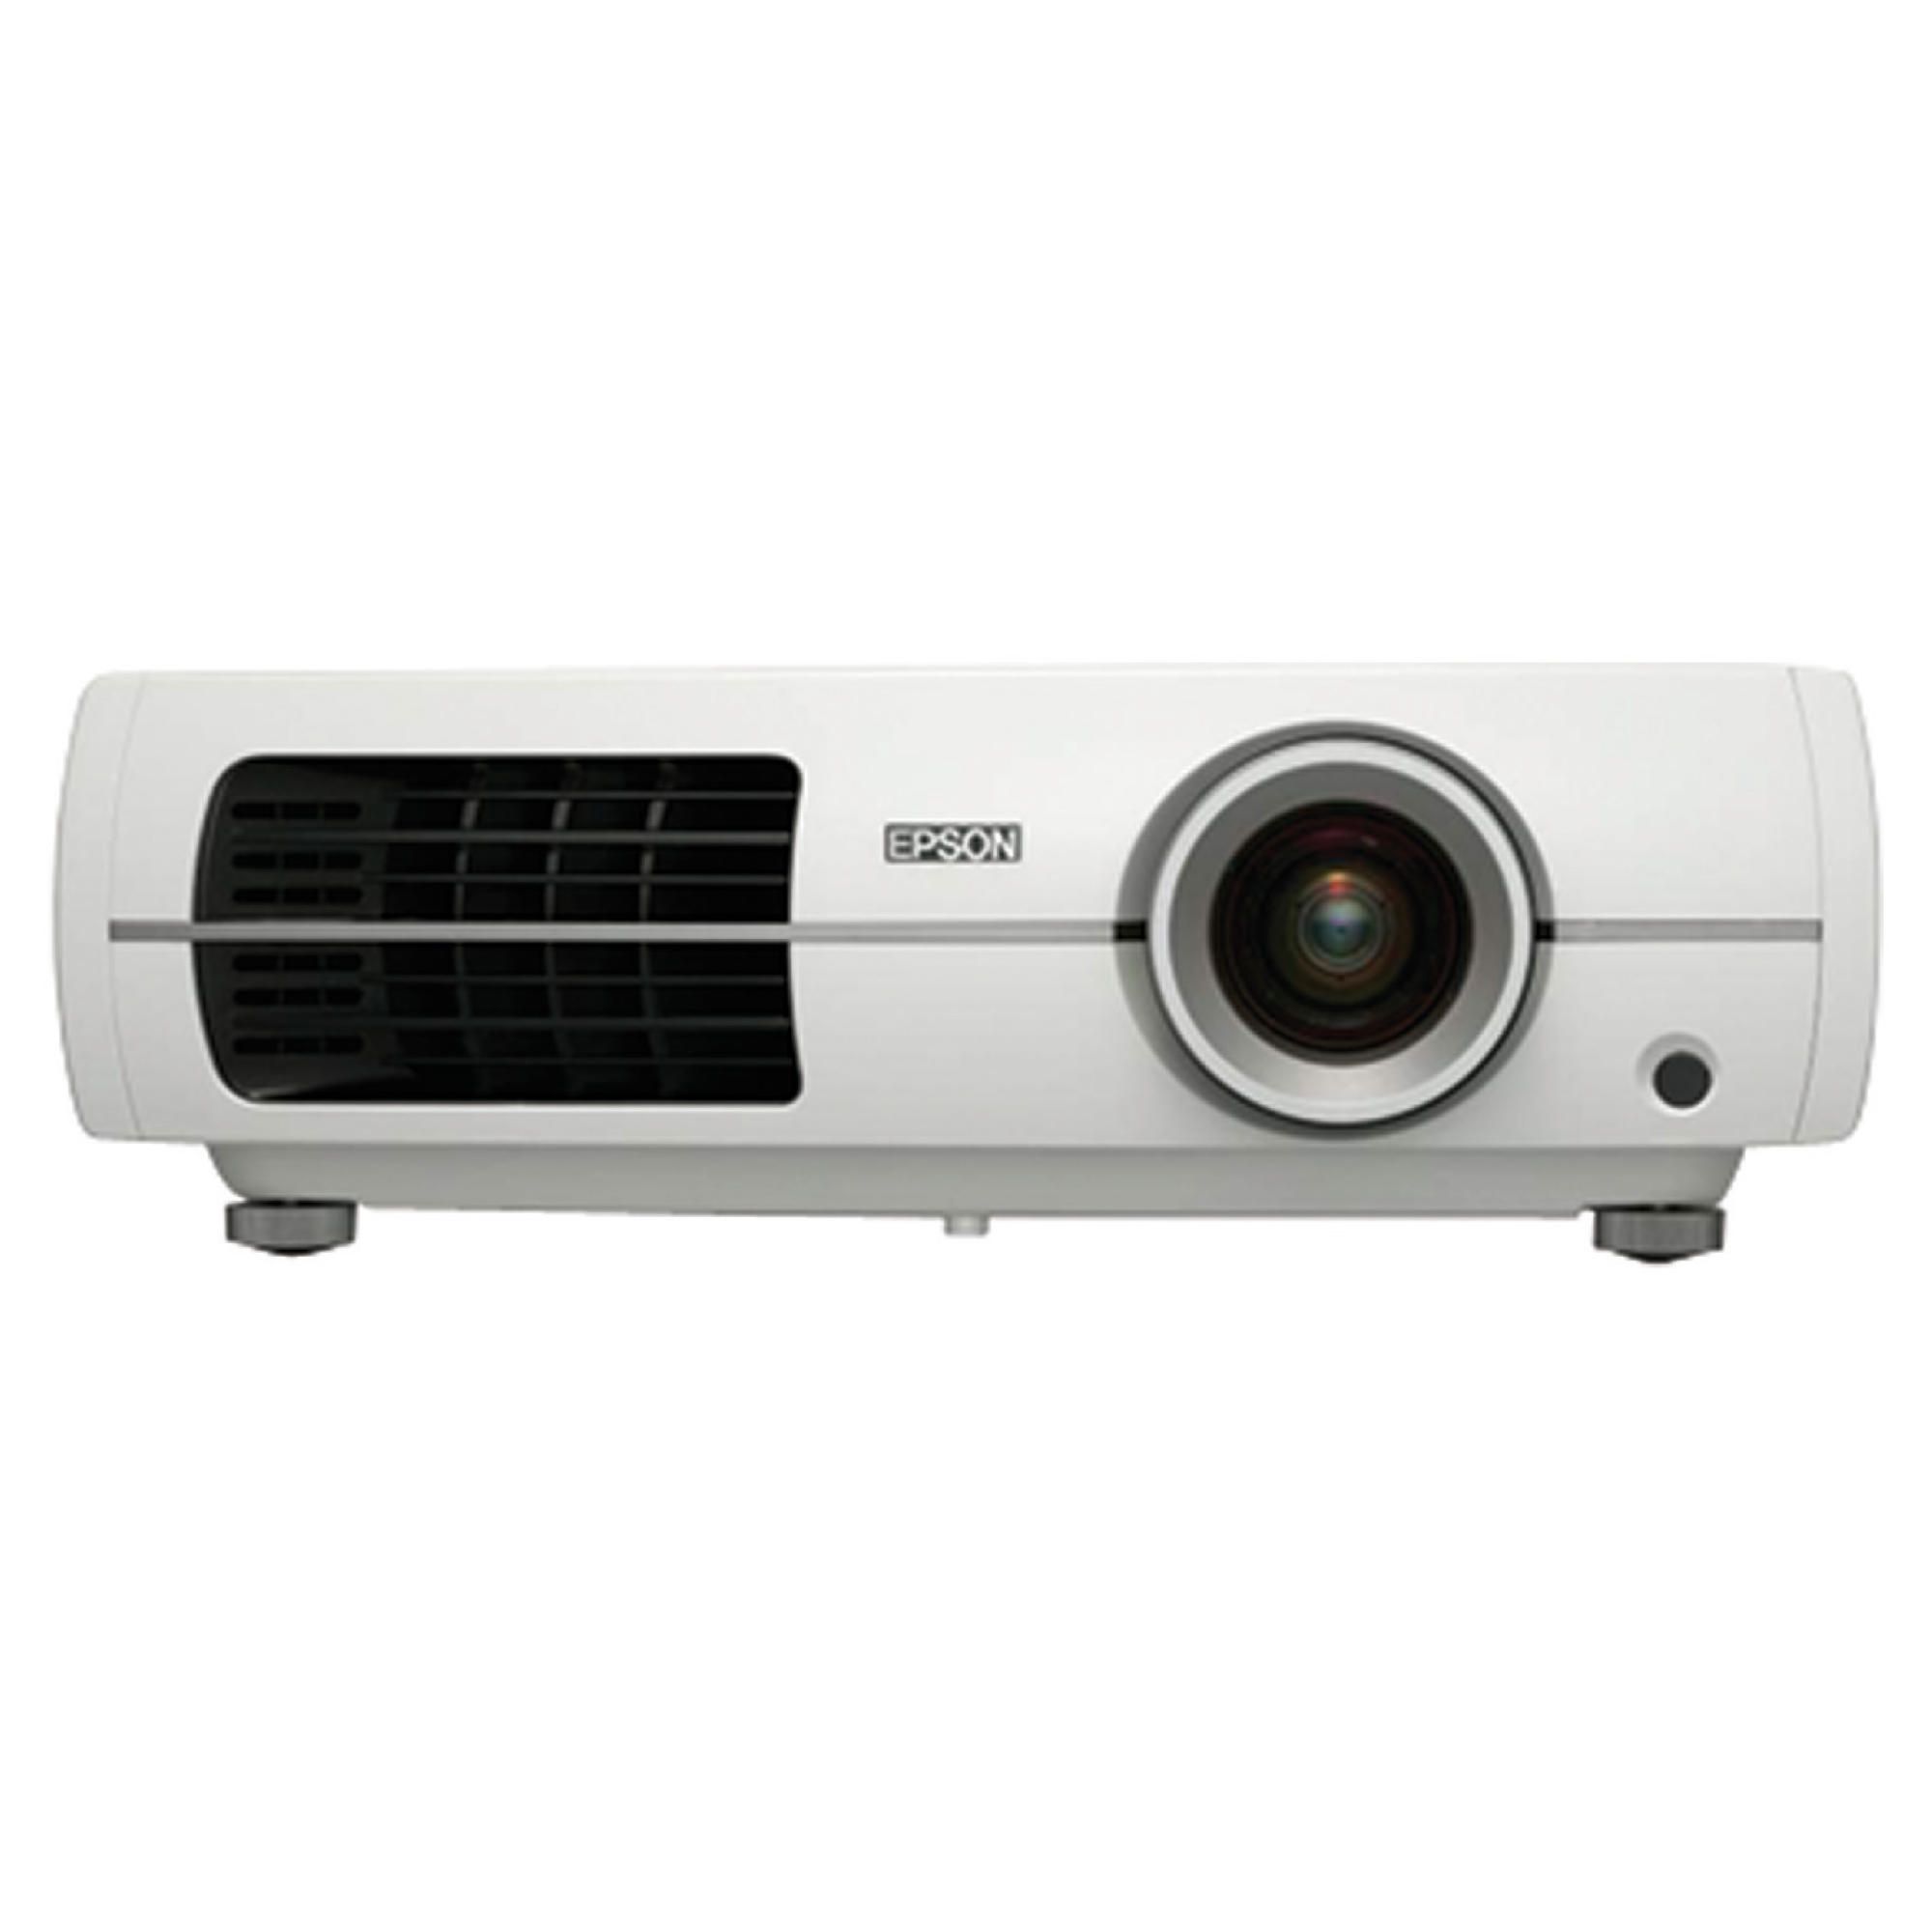 Epson TW3200 Full HD Projector at Tesco Direct